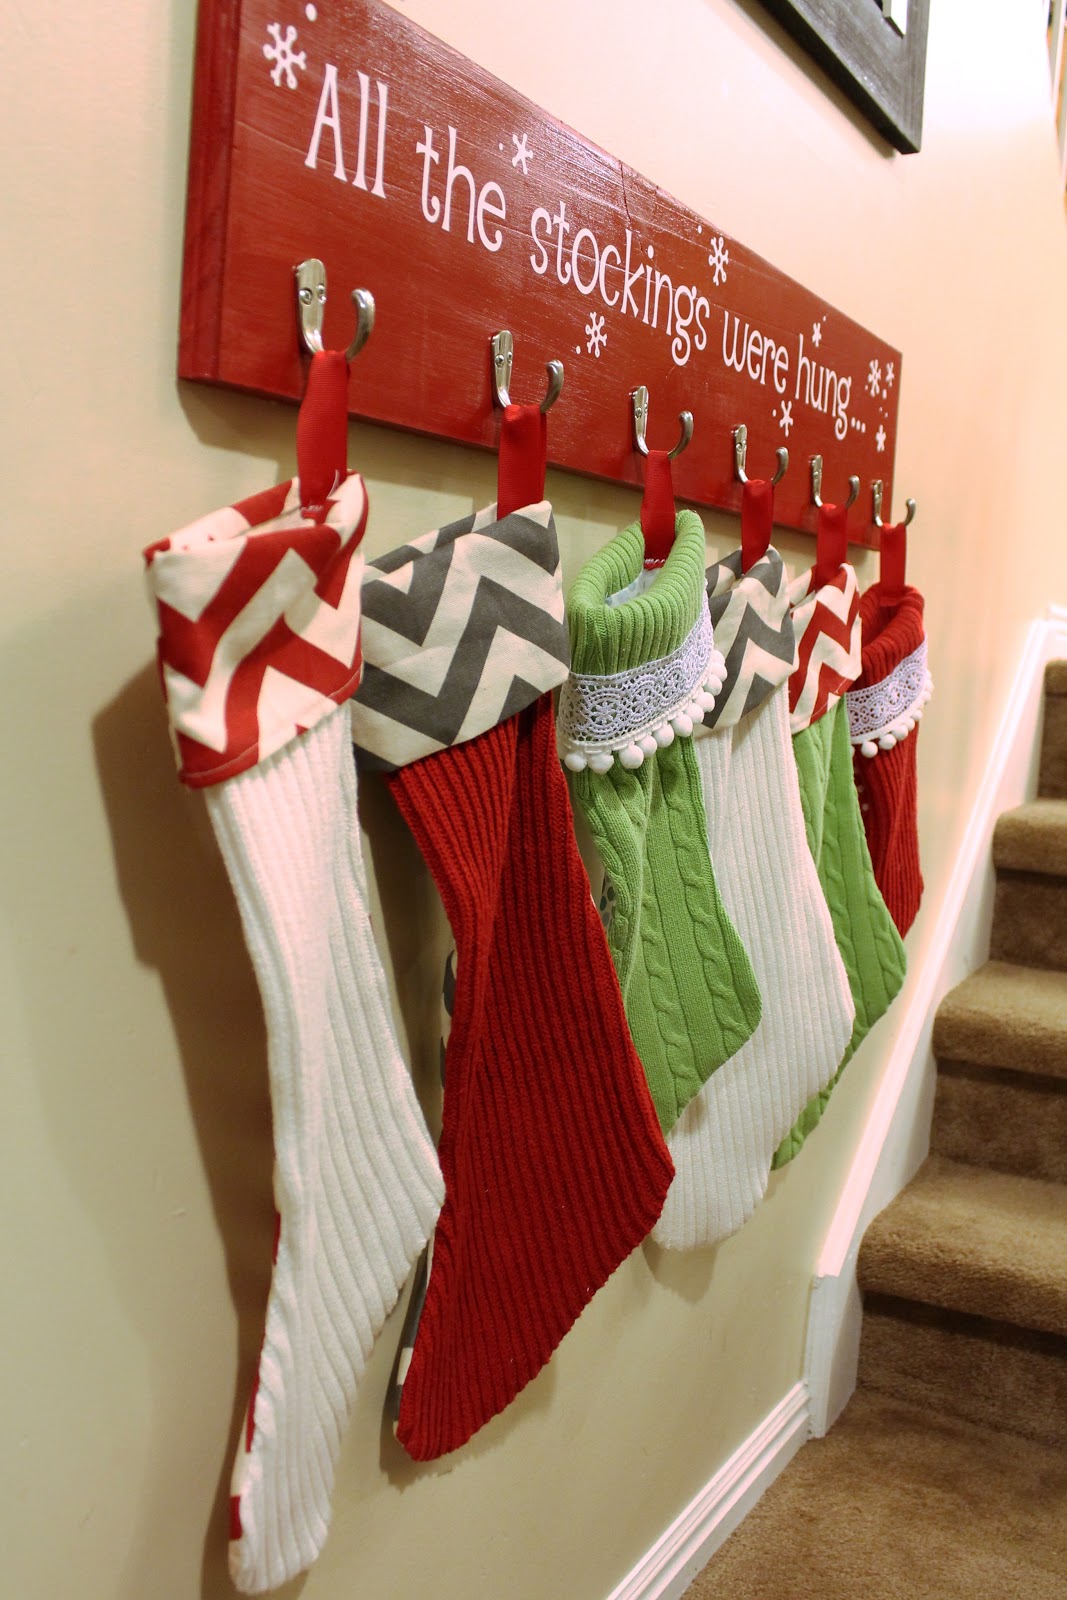 DIY Stockings from thrift store sweaters! - Find it, Make it, Love it